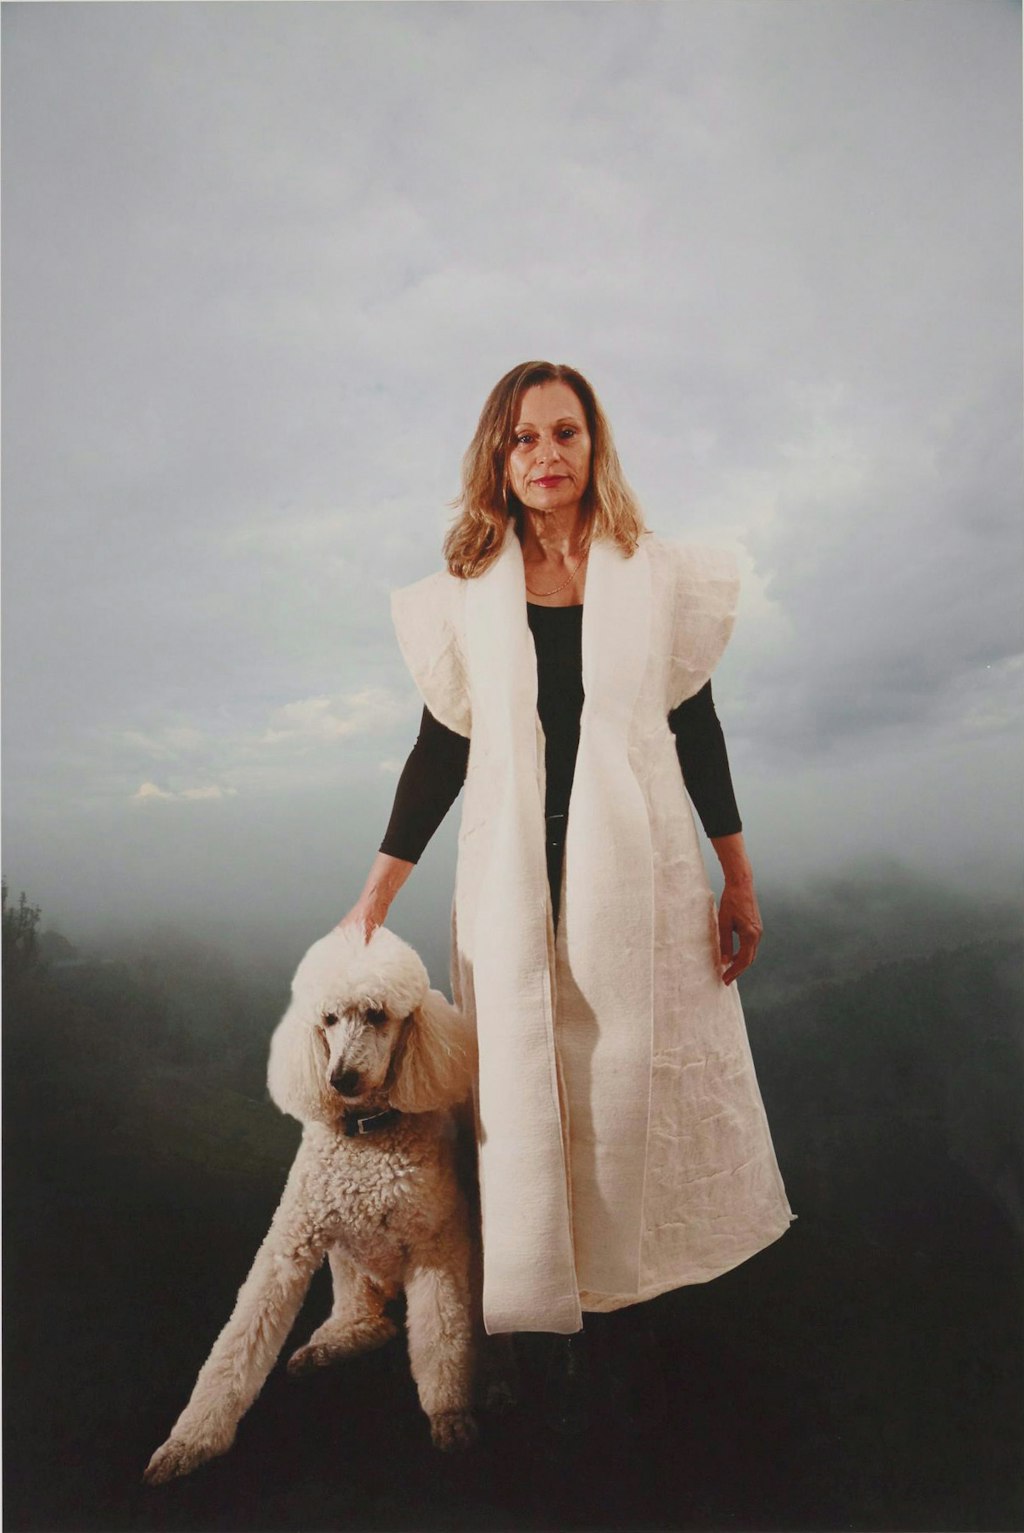 A person wearing a long sleeveless white felt coat stands next to a large white dog.